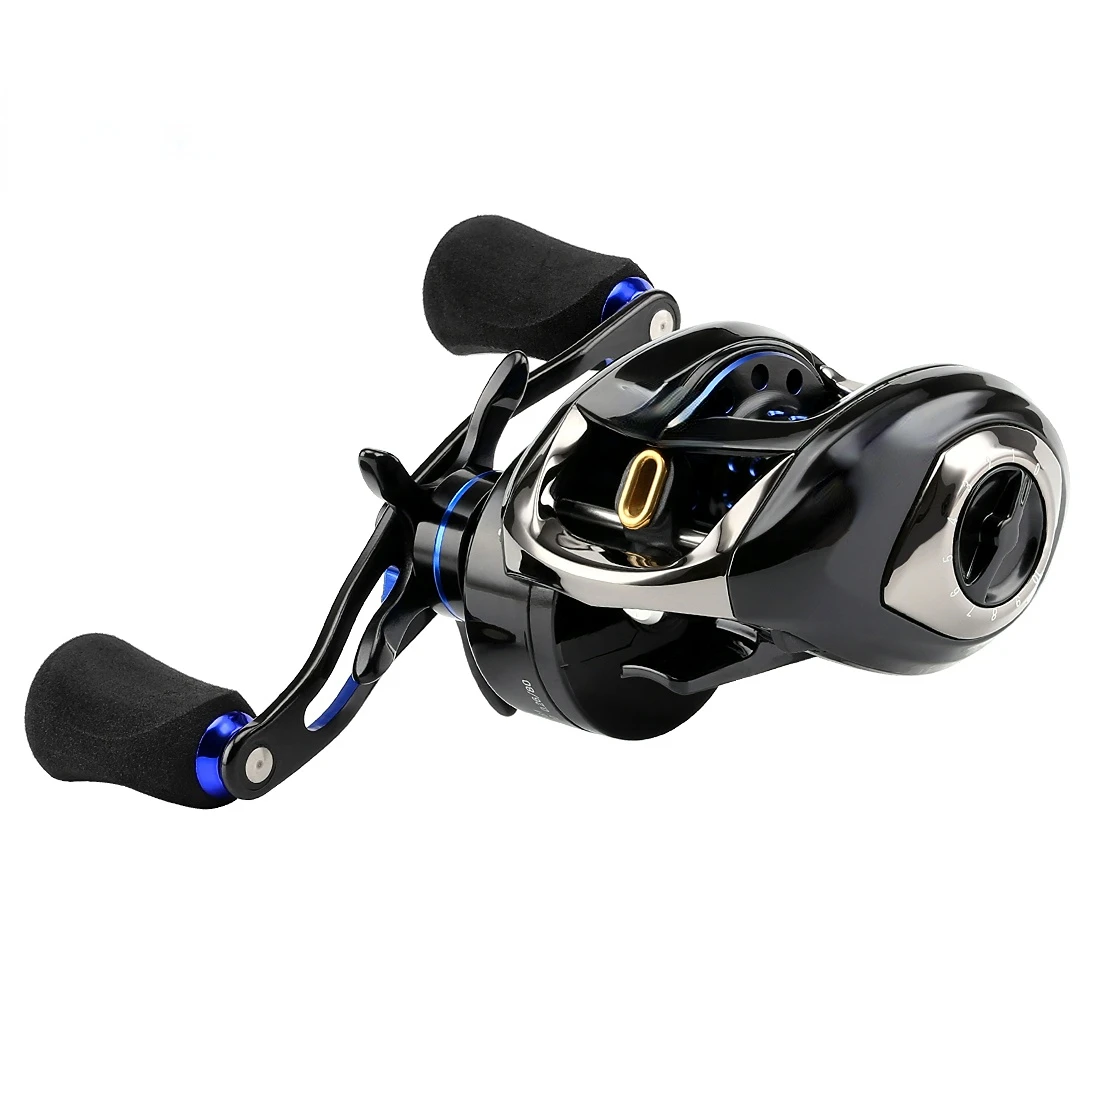 

Close Out! SeaKnight DRYAD Baitcasting Fishing Reel 12BB 7.6/7.0:1 High Speed Carbon Fiber Seawater Casting Reel 8.5KG Close Out